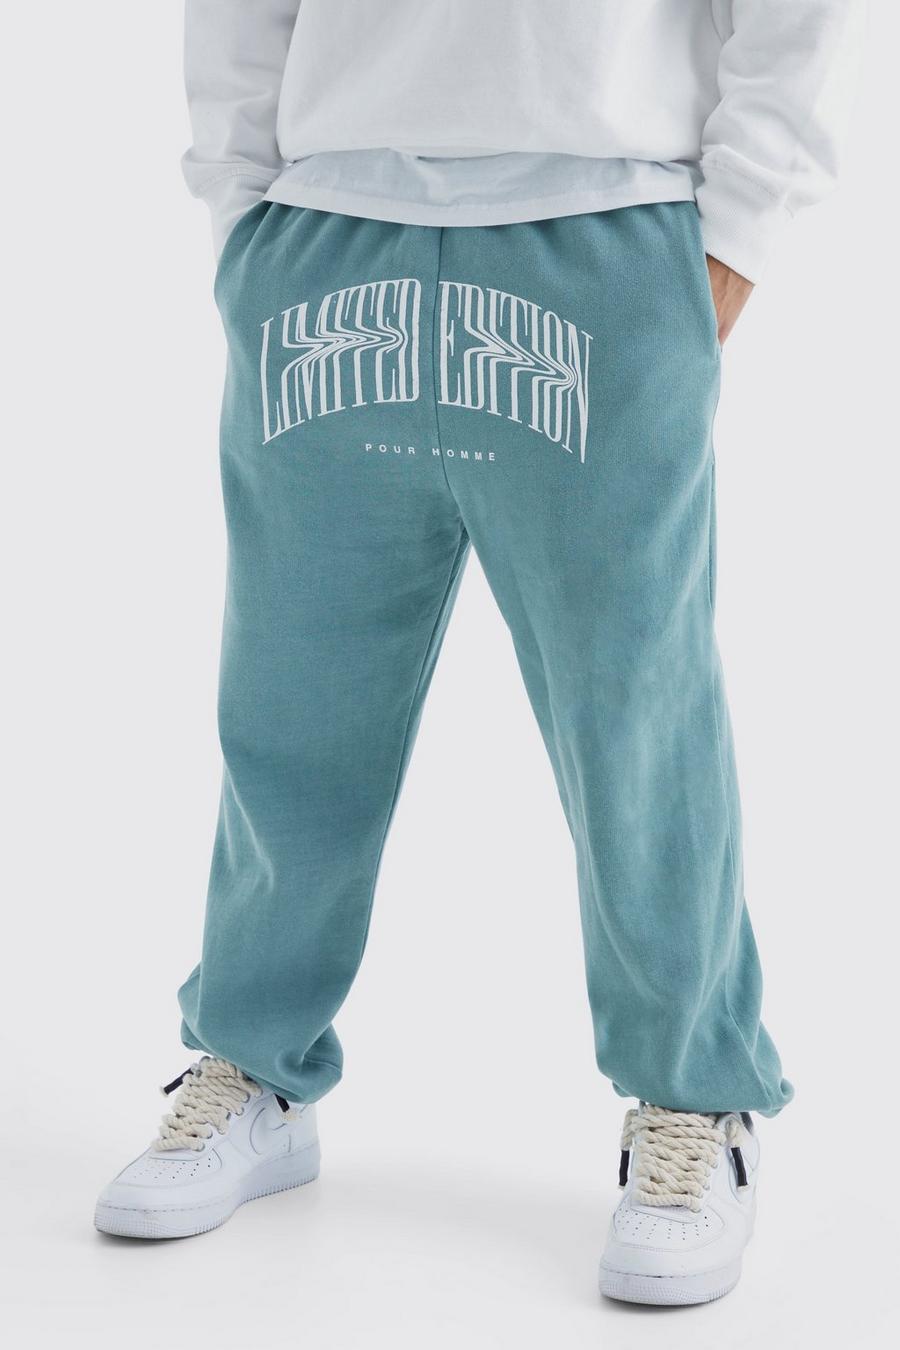 Sage gerde Oversized Limited Crotch Graphic Jogger